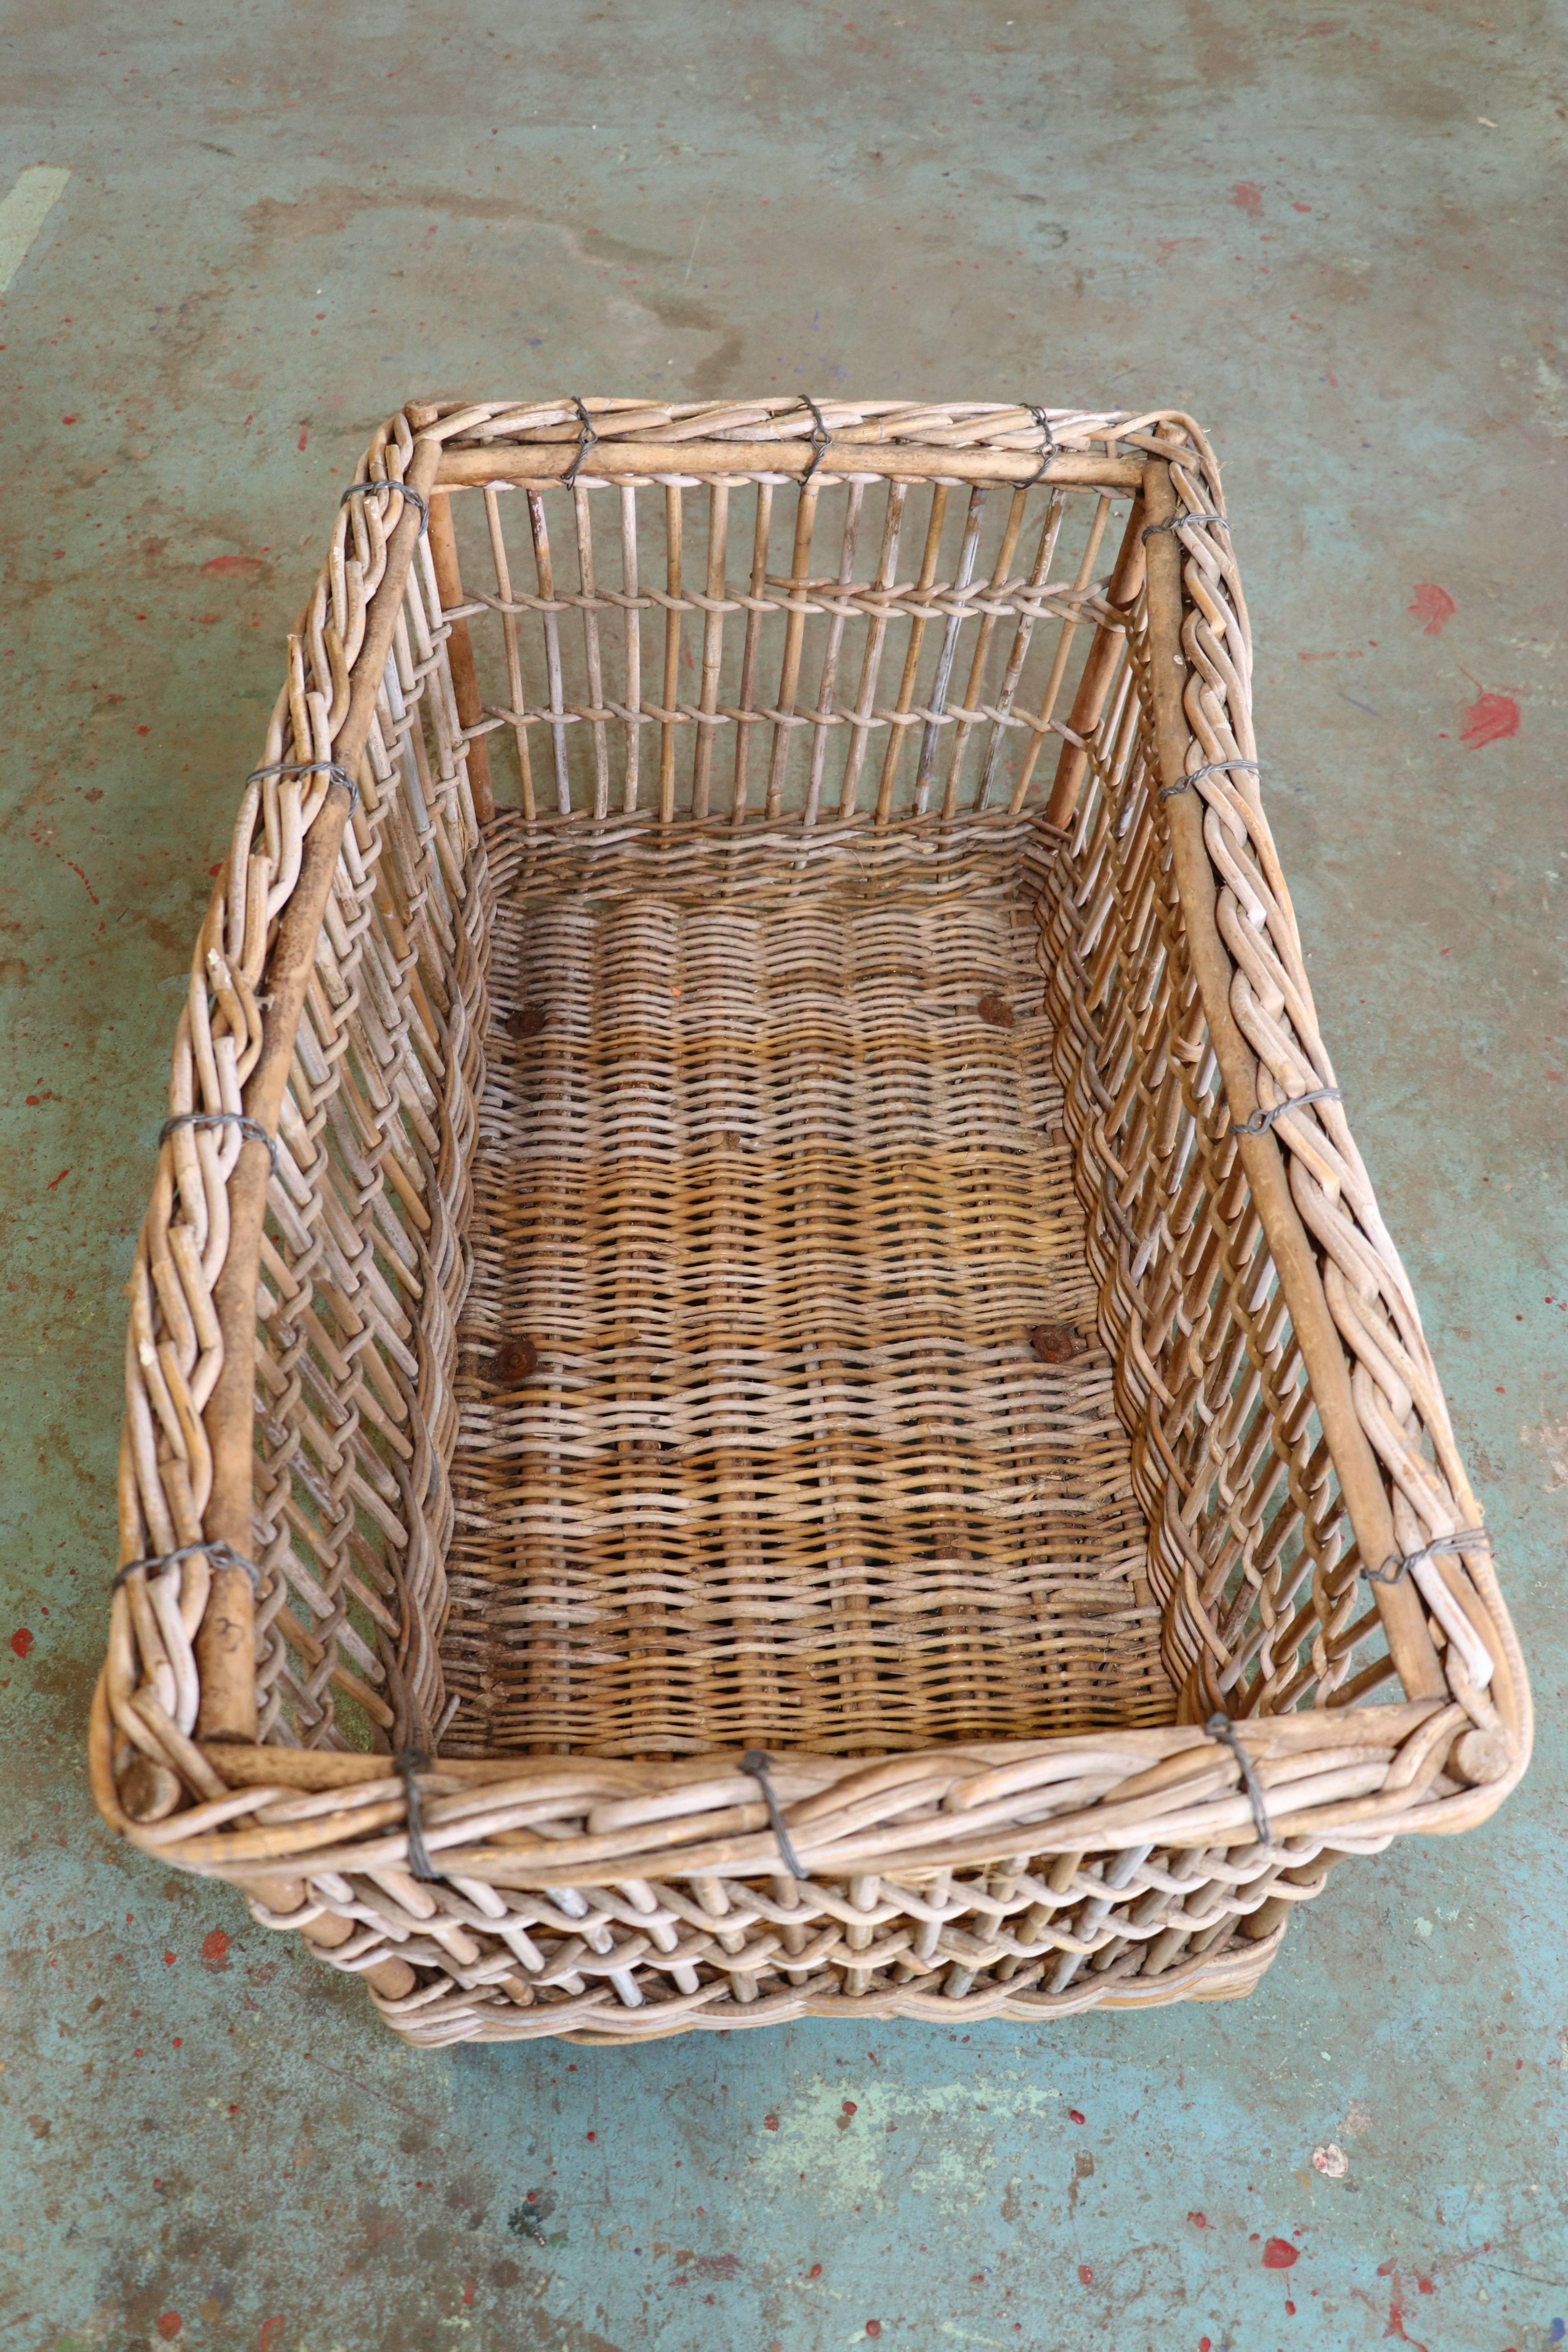 Woven Large, Belgian Wicker Cart on Casters, From a Linen Factory, Circa 1920